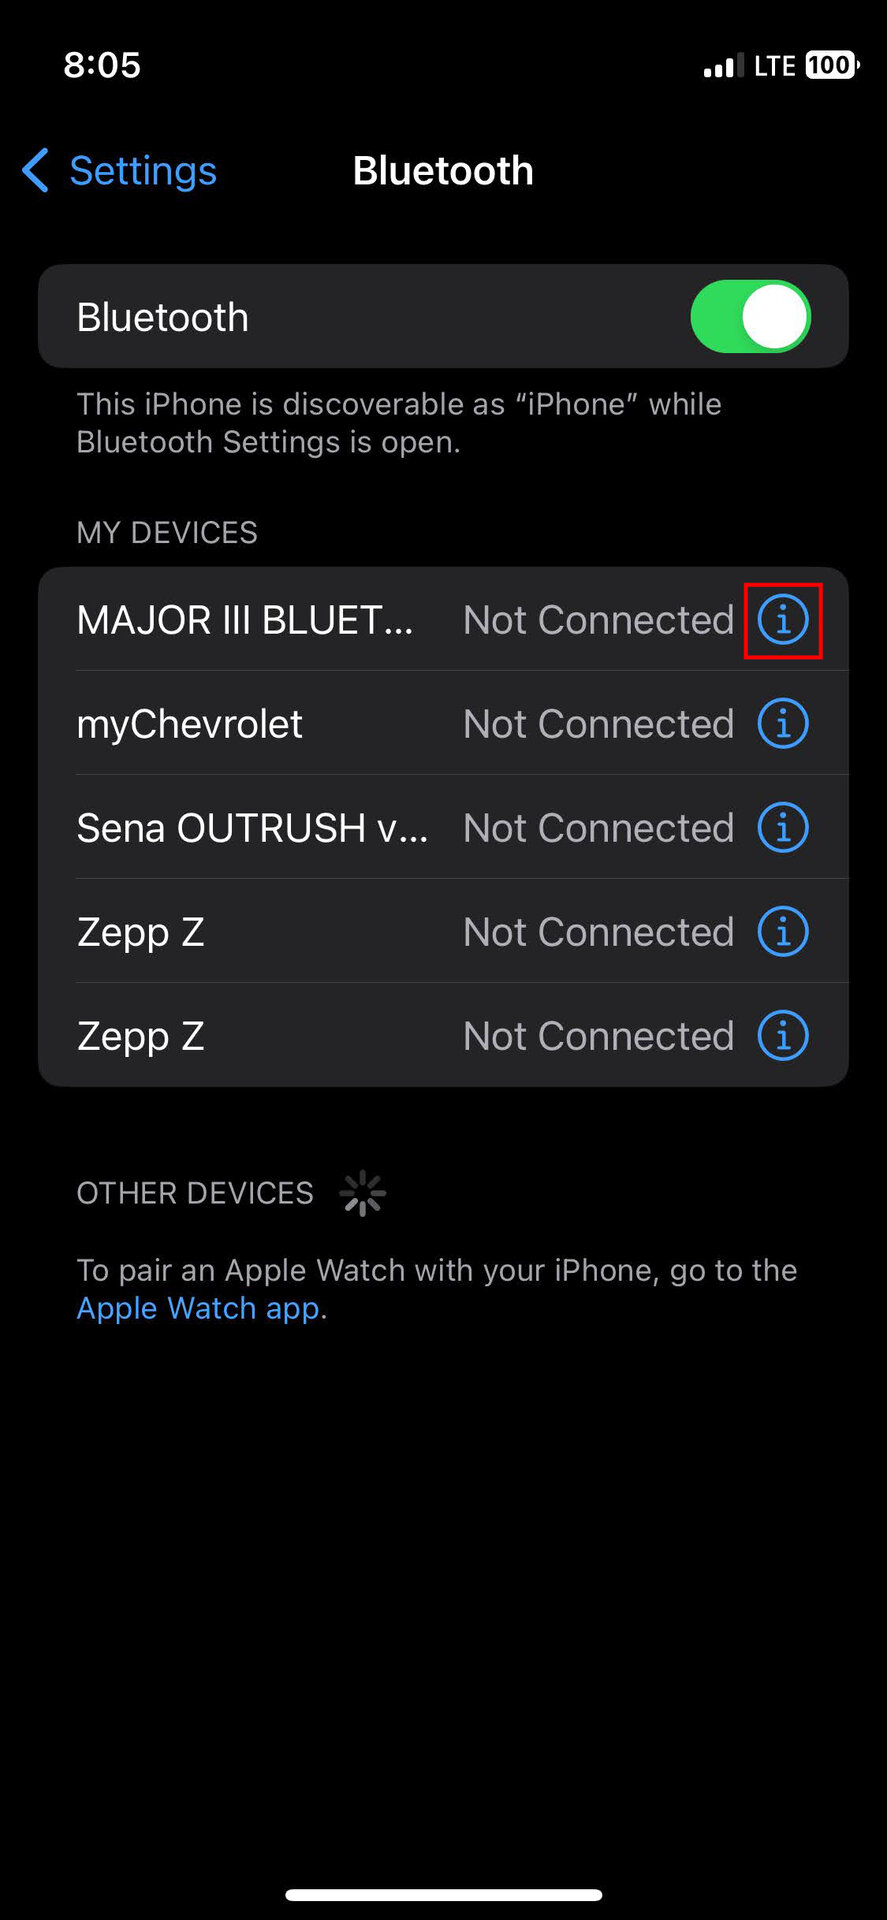 How to forget Bluetoothg headphones on iPhone (2)